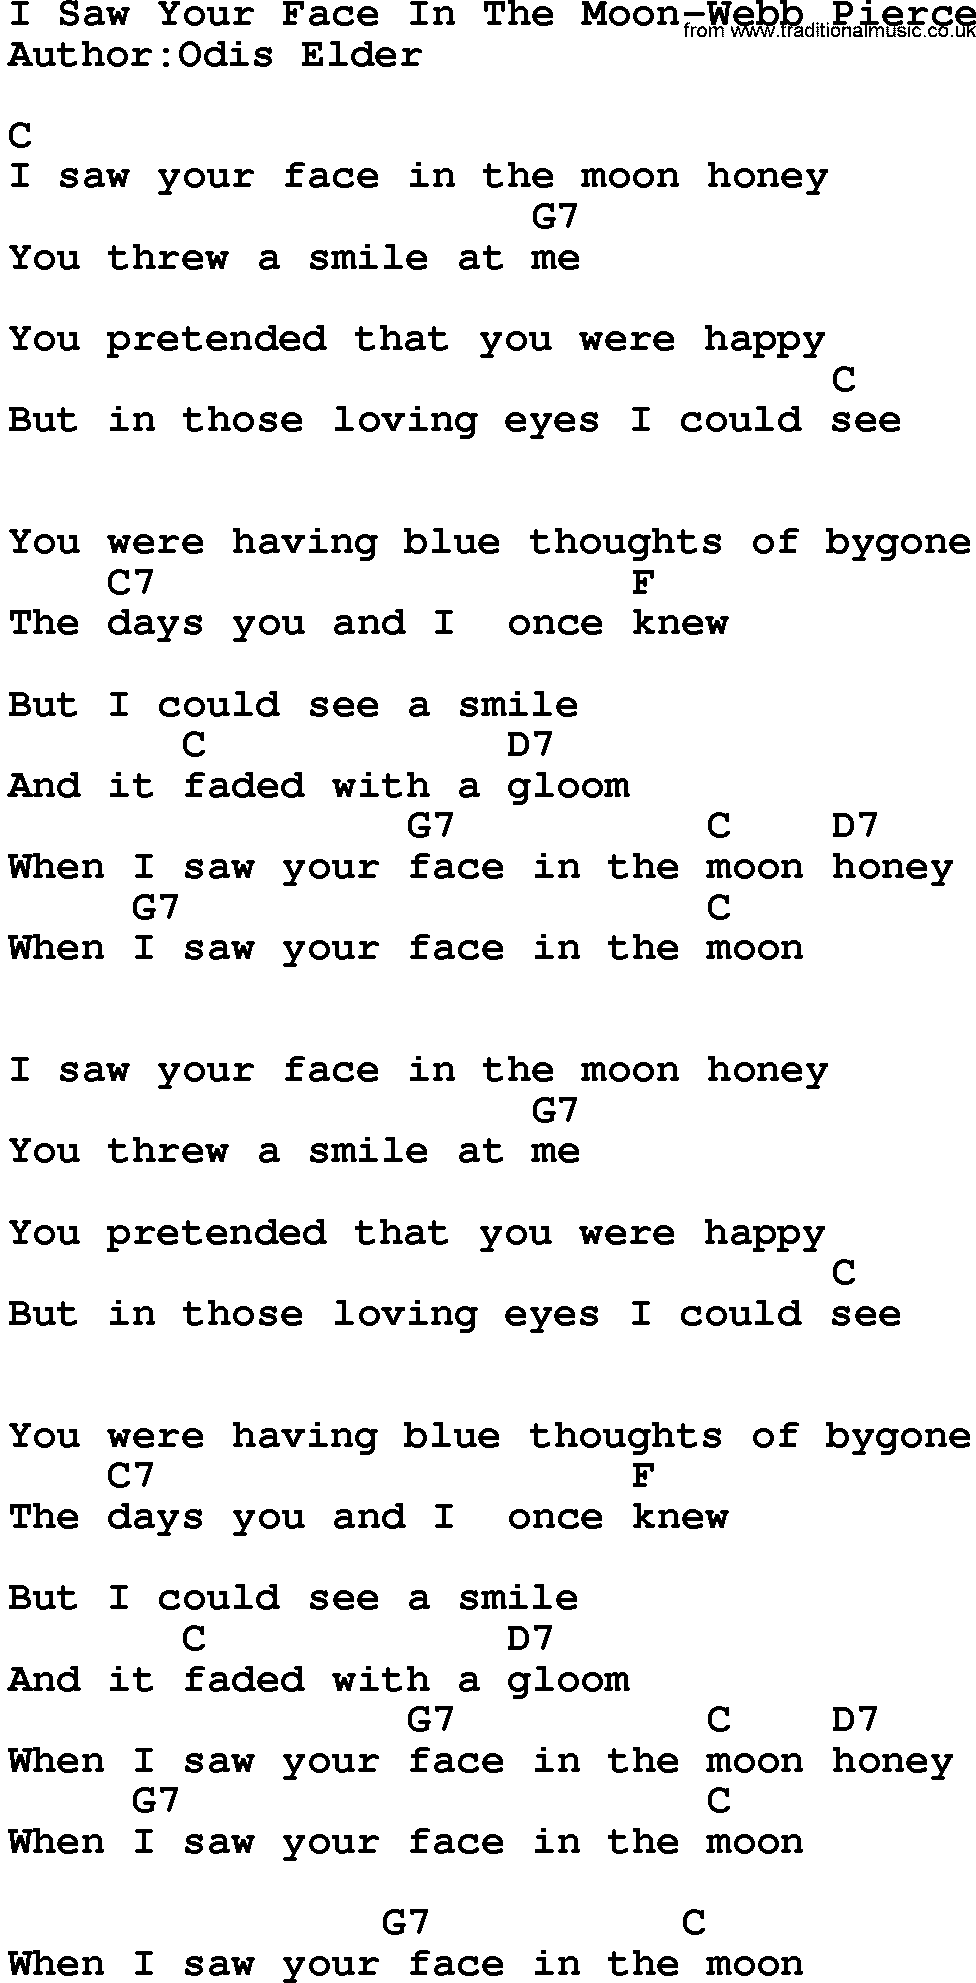 Country music song: I Saw Your Face In The Moon-Webb Pierce lyrics and chords